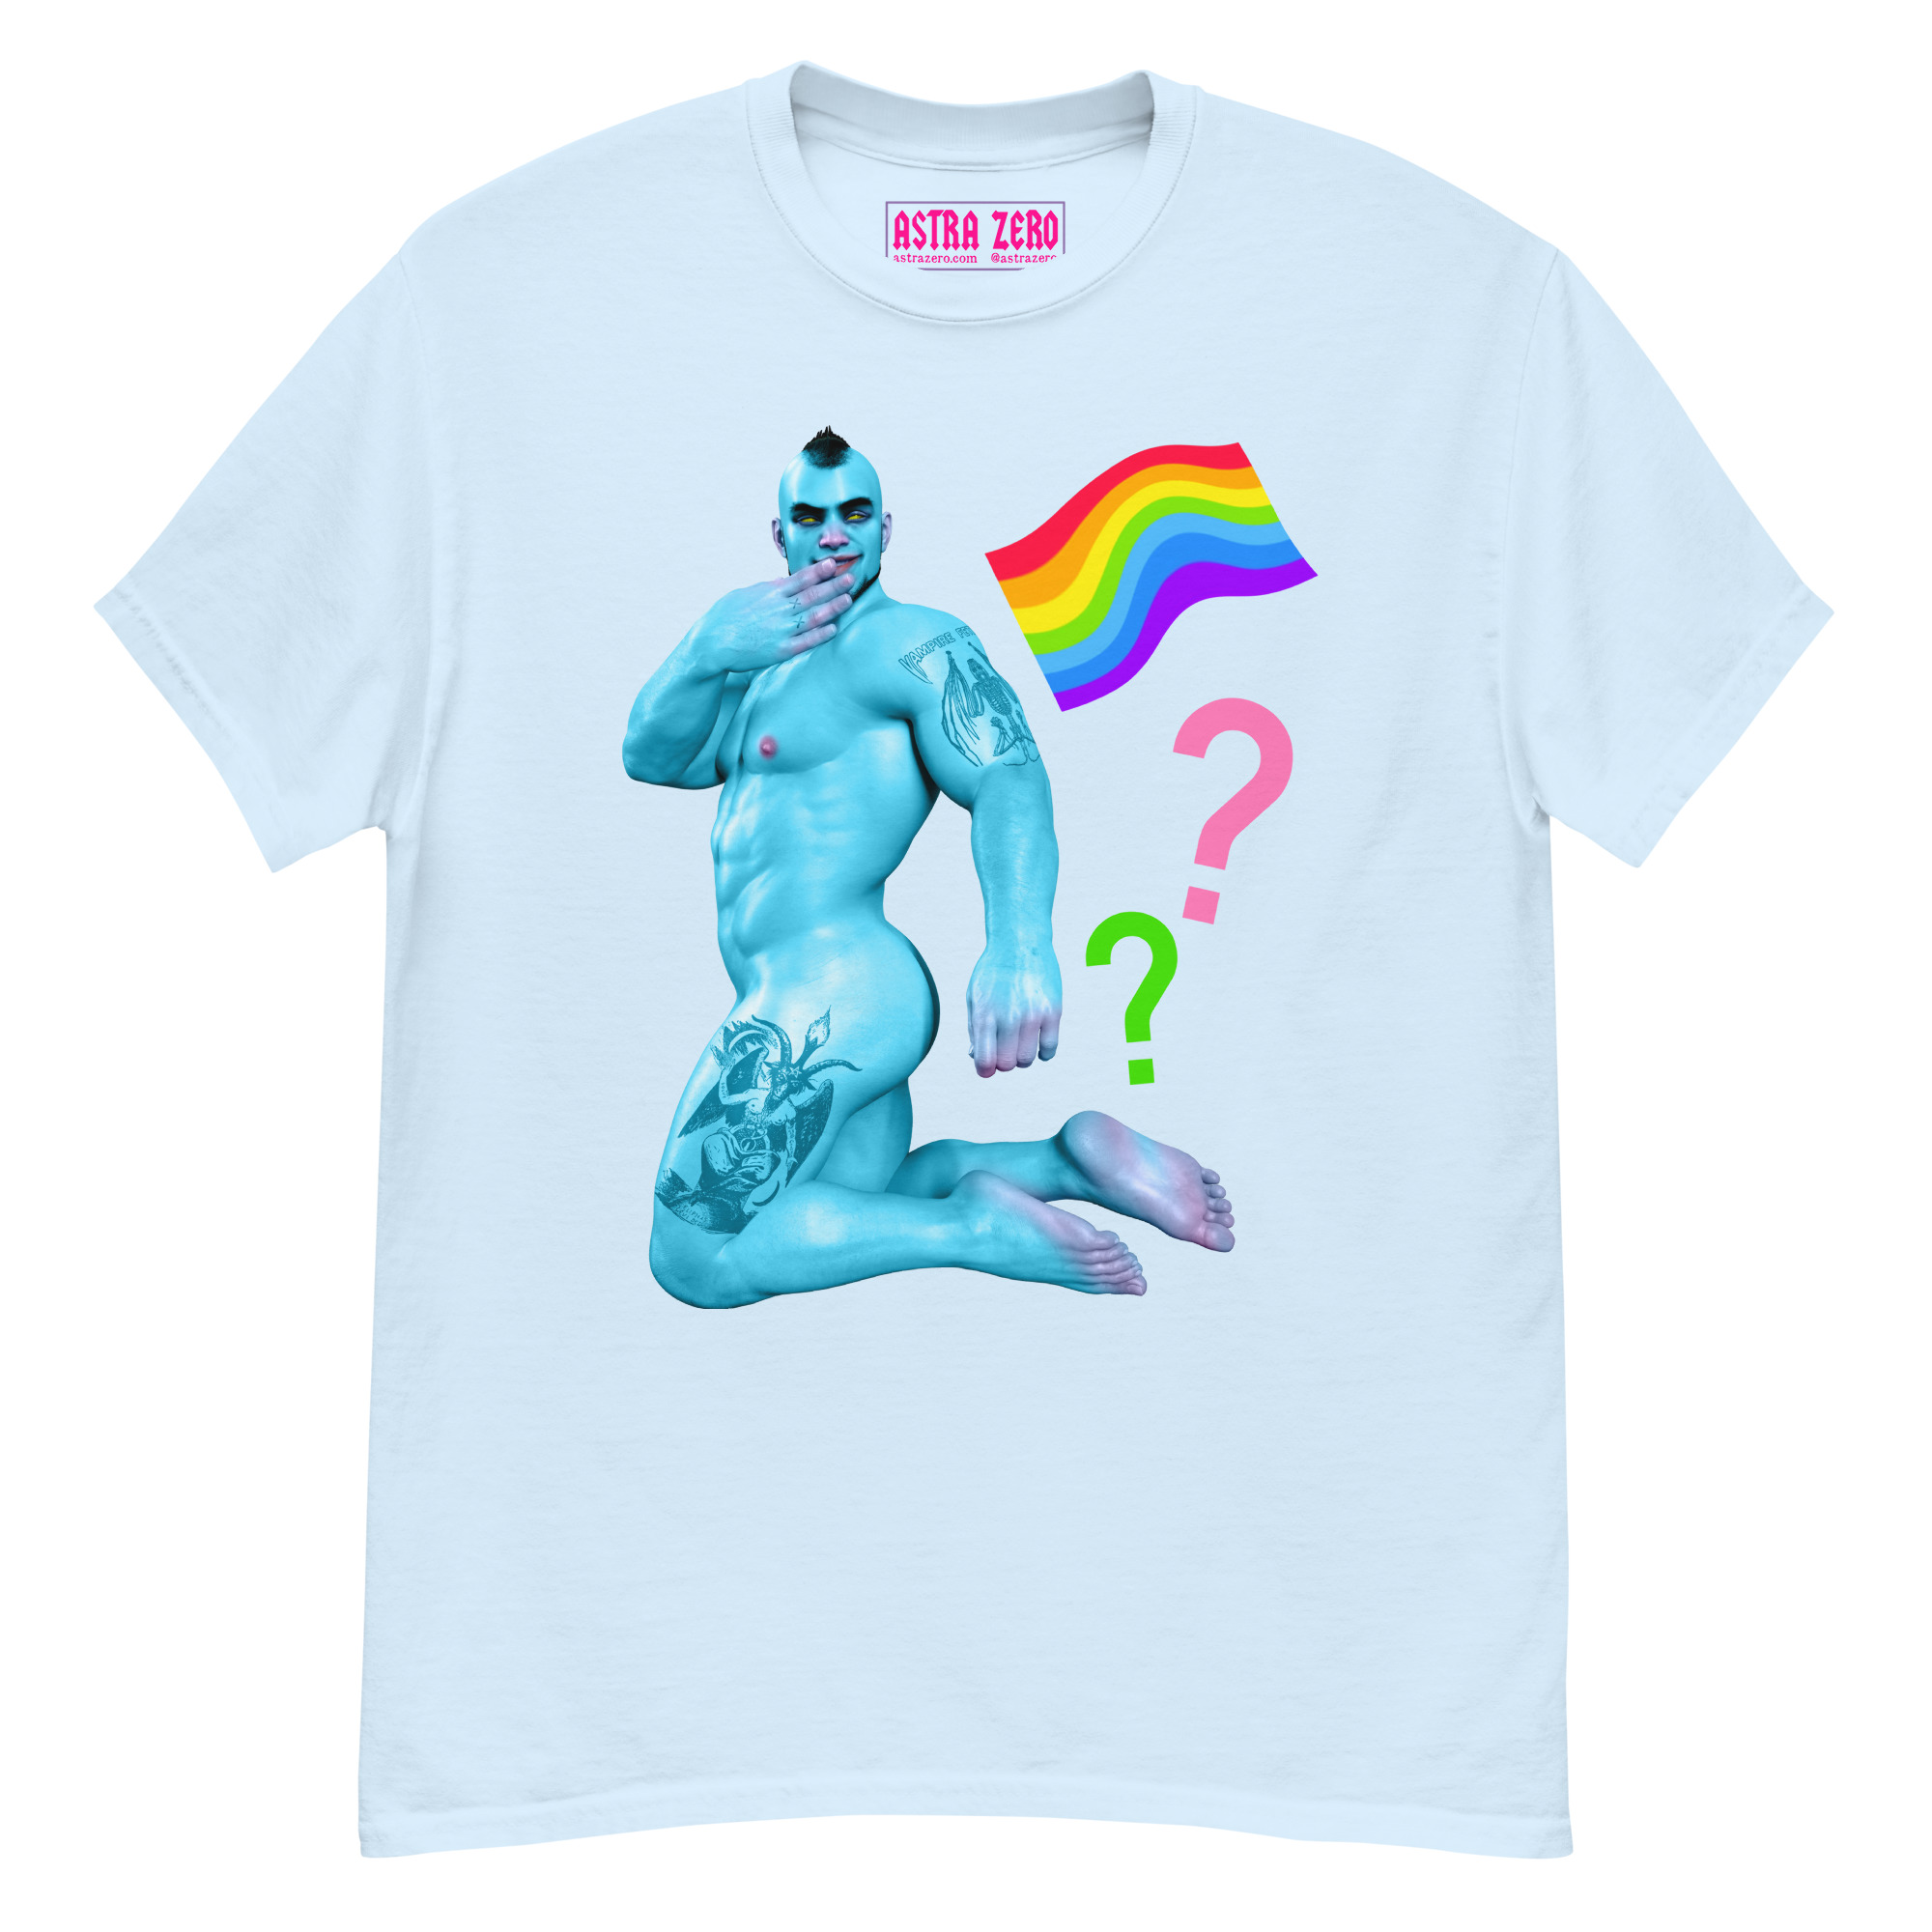 Featured image for “Gay? - Men's classic tee”